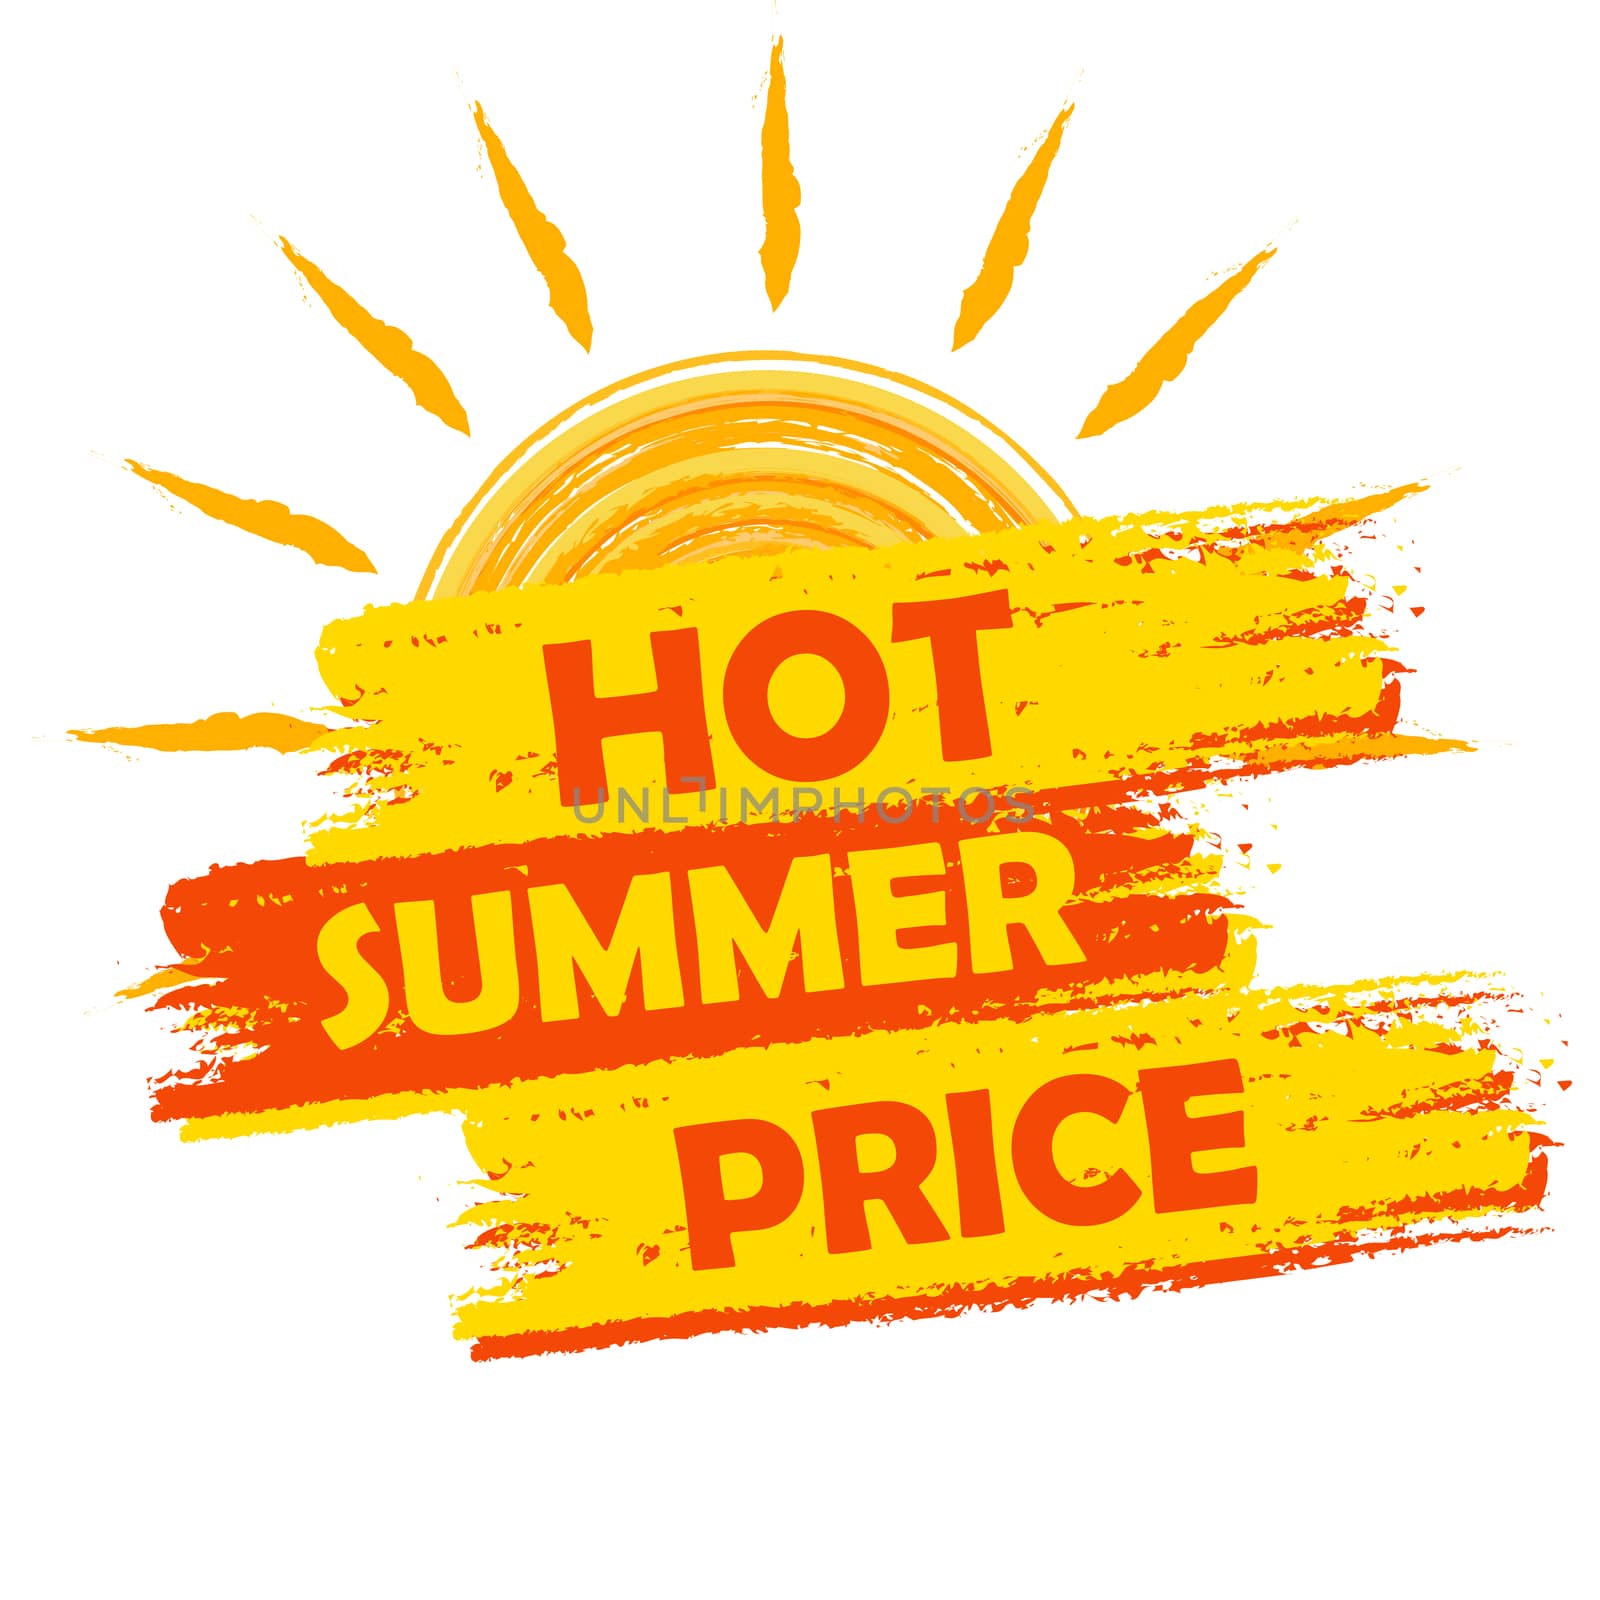 hot summer price with sun sign, yellow and orange drawn label by marinini